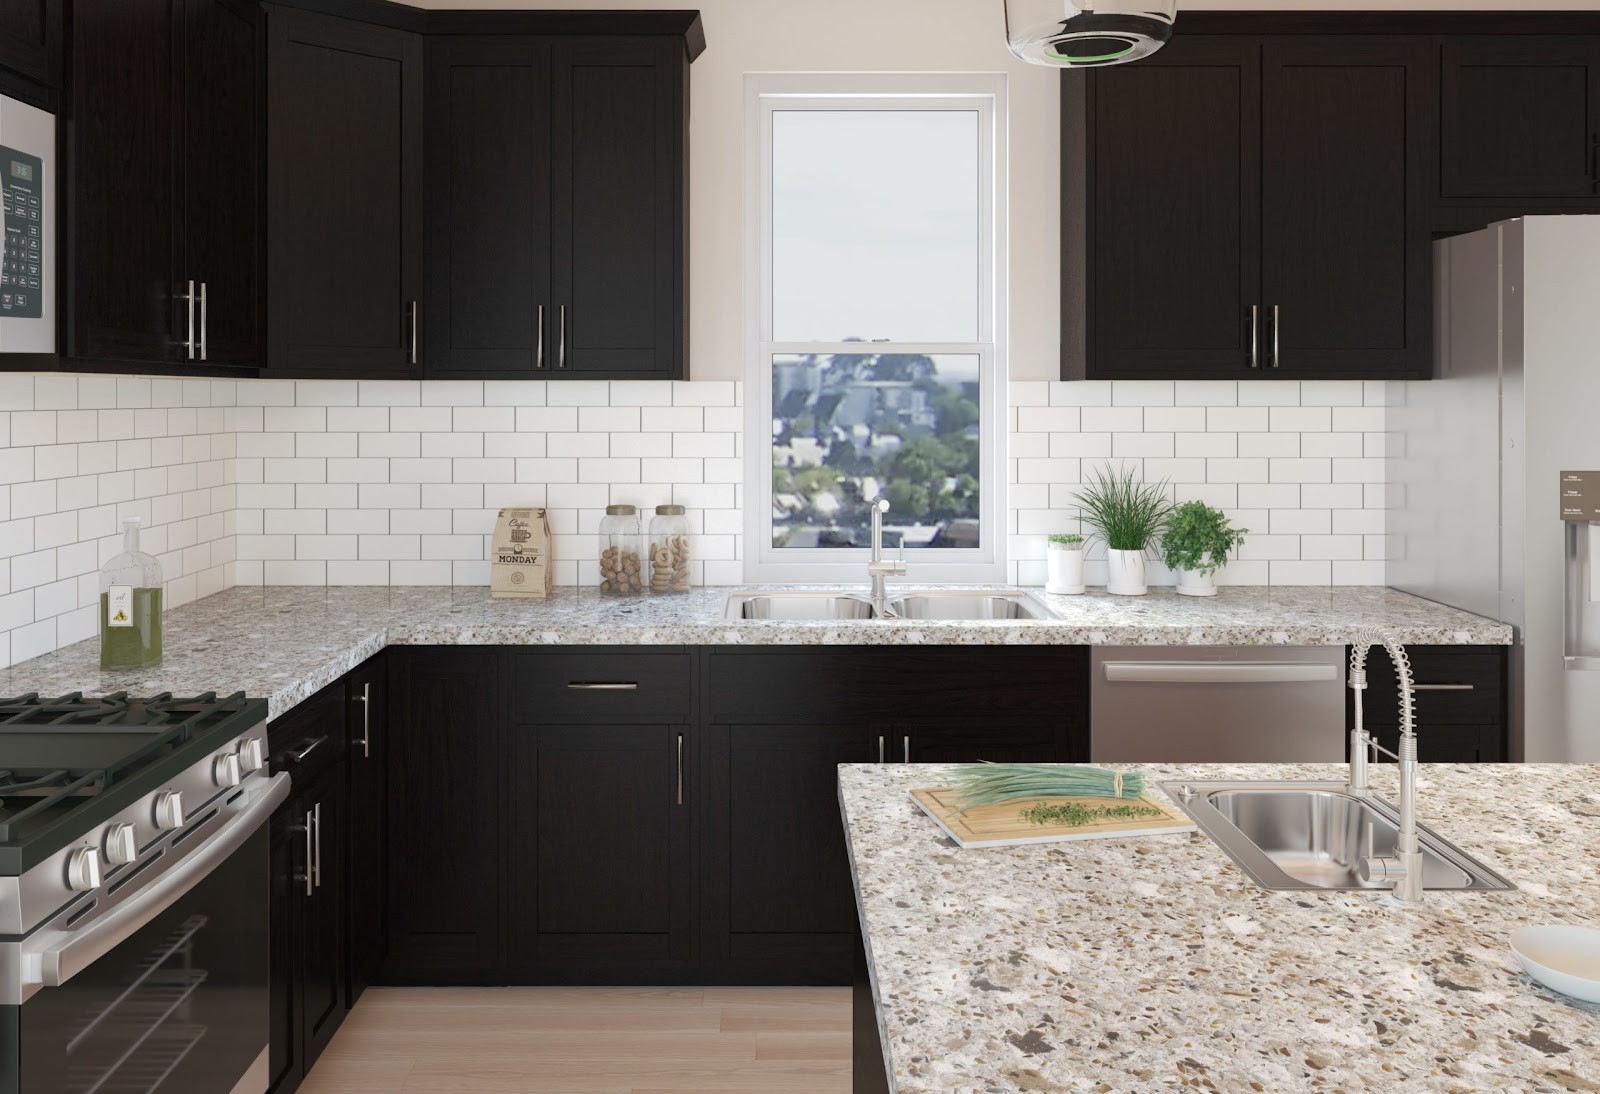 Some steps to follow when choosing granite countertop suppliers